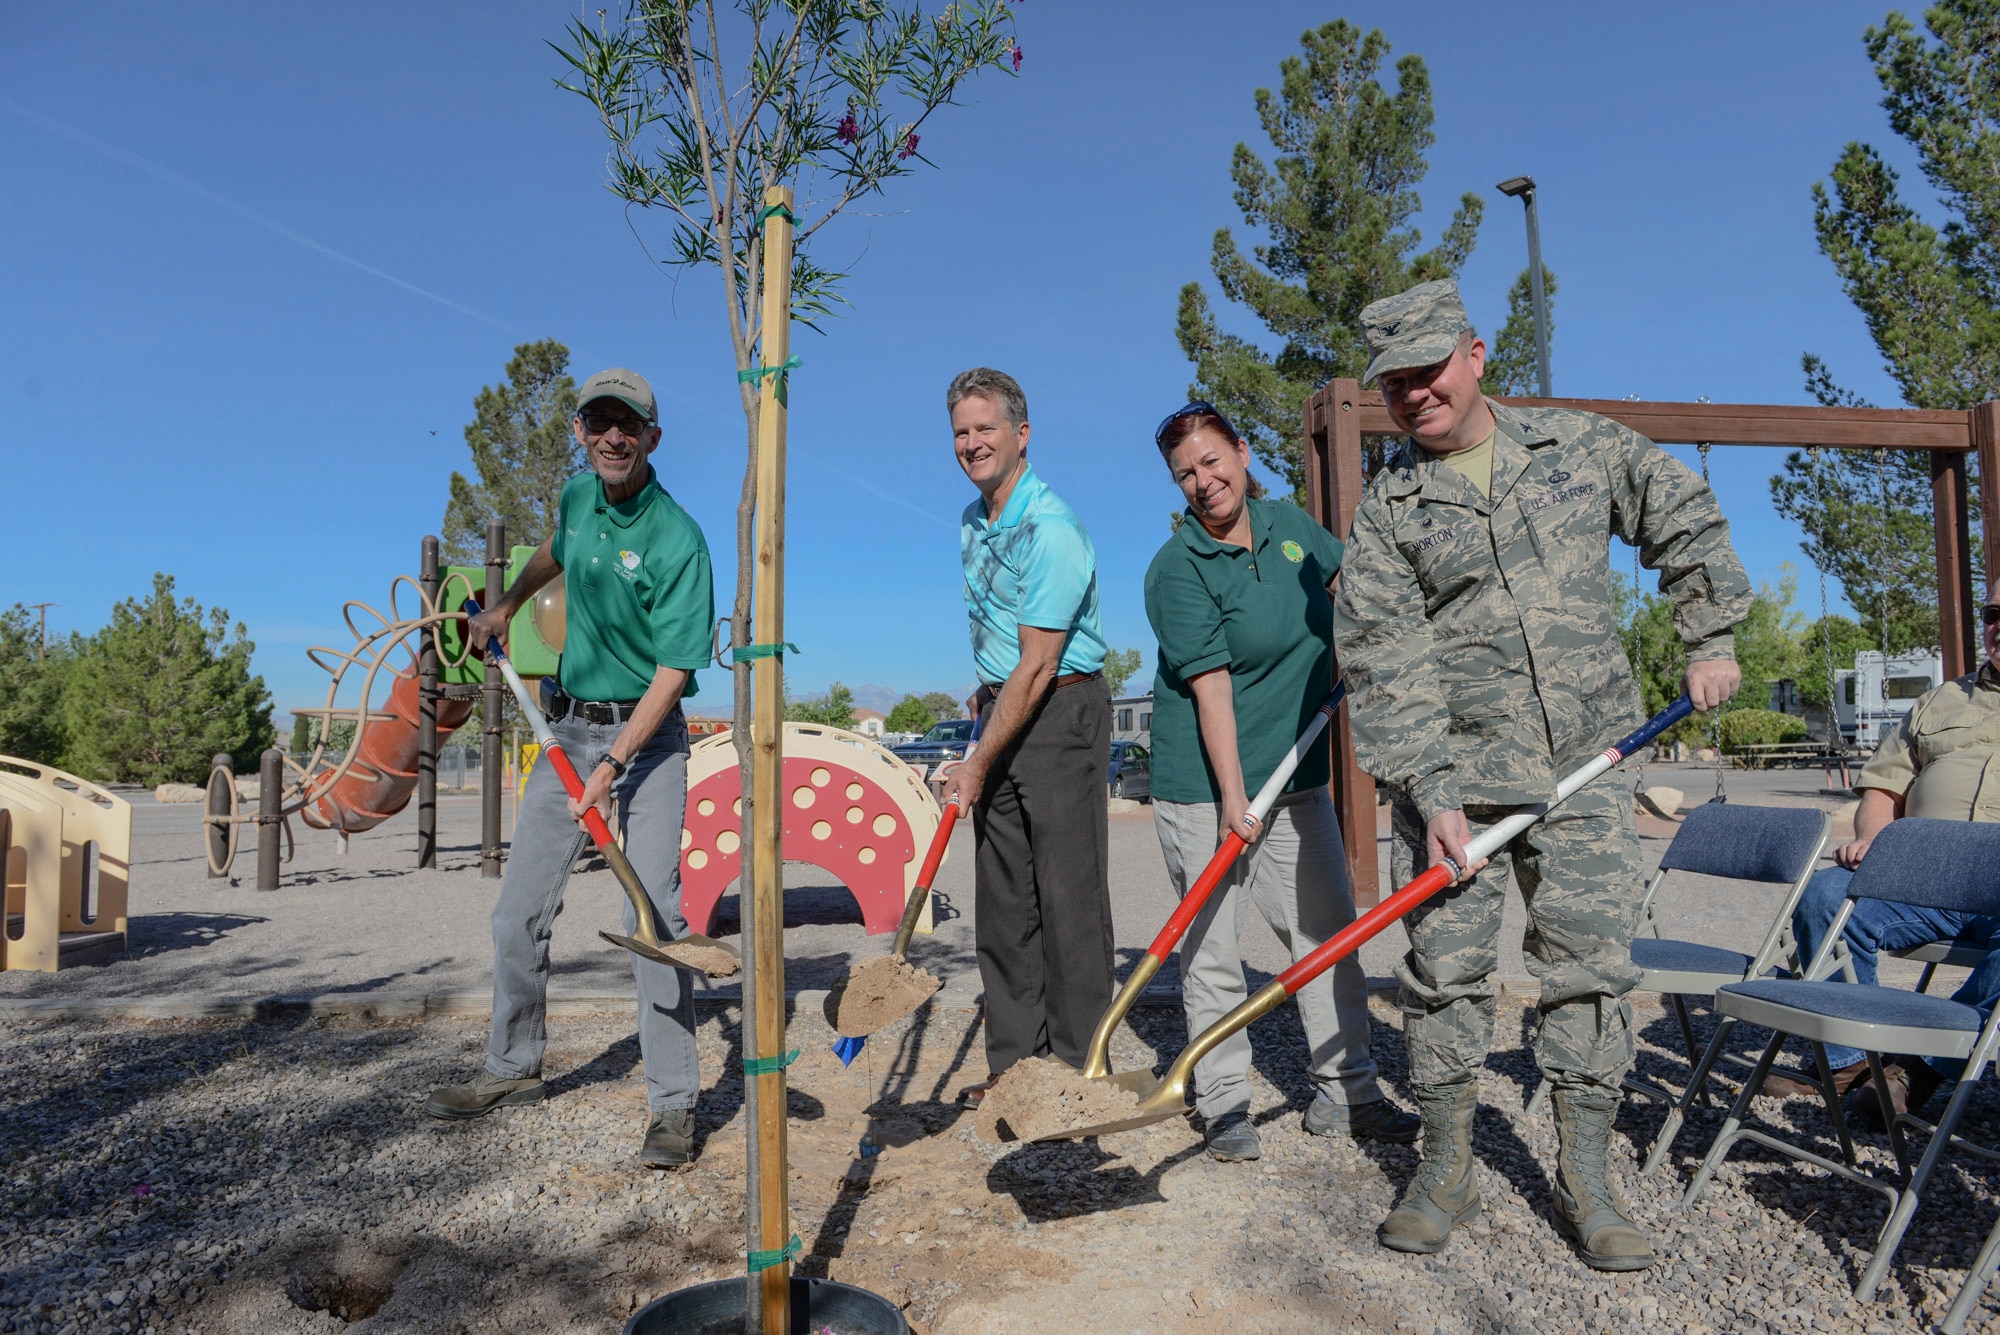 Base and community leadership prepare to plant a Desert Willow tree at the Desert Eagle RV Park playground on Nellis Air Force Base, May 3, 2017. Two Desert Willow trees and two Arizona Ash trees were planted here to celebrate Arbor Day. Both trees are native to the desert ecosystem for their ability to thrive in low water and high heat conditions. (U.S. Air Force photo by Airman 1st Class Andrew D. Sarver/Released)